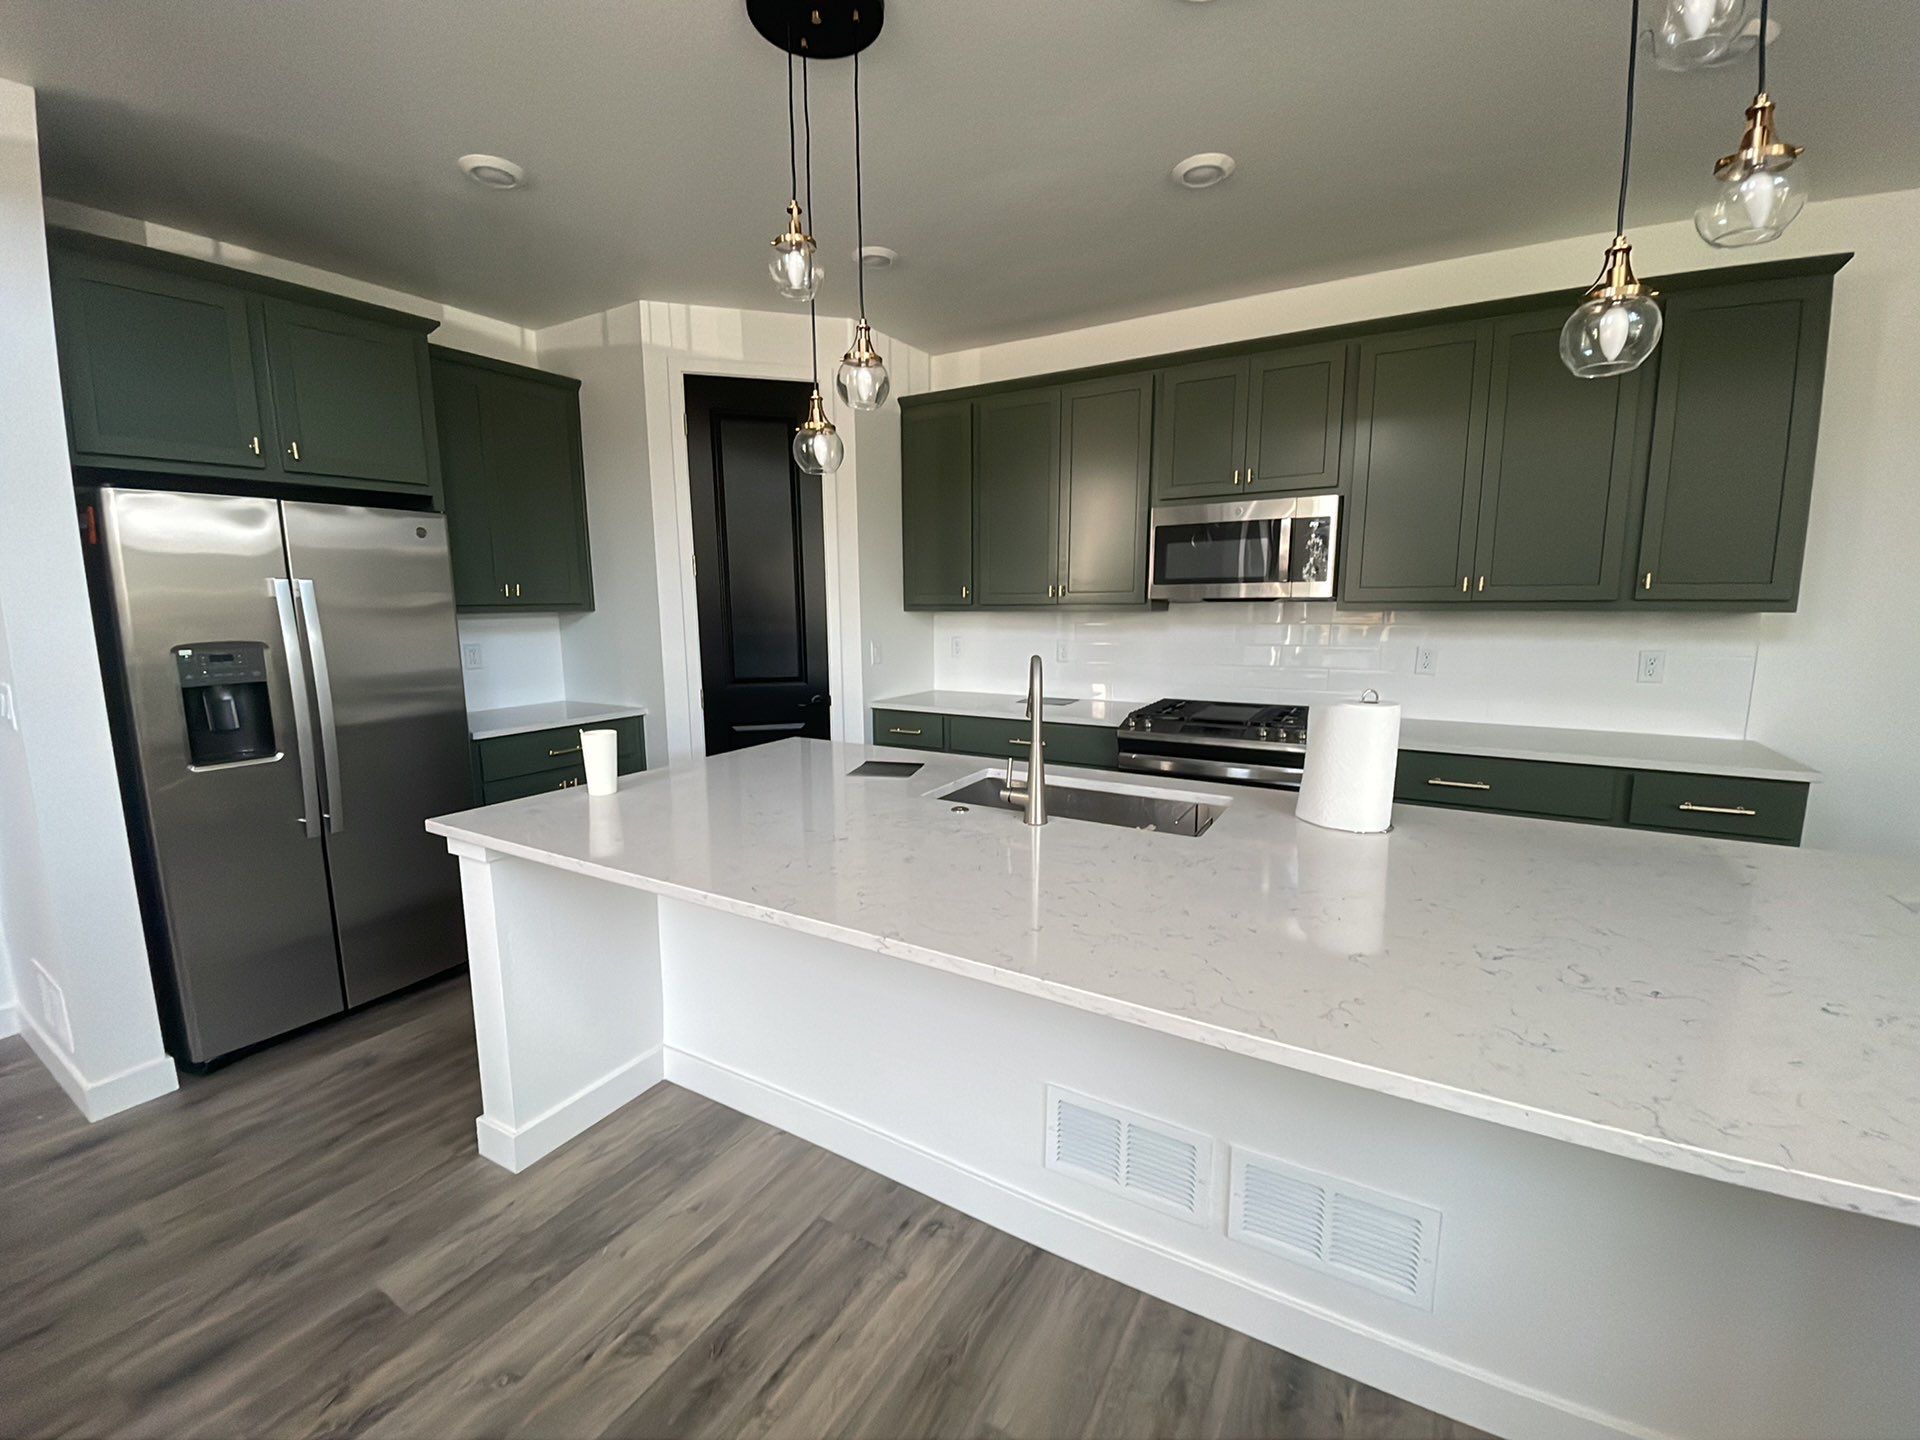 Image of interior cabinets in green 